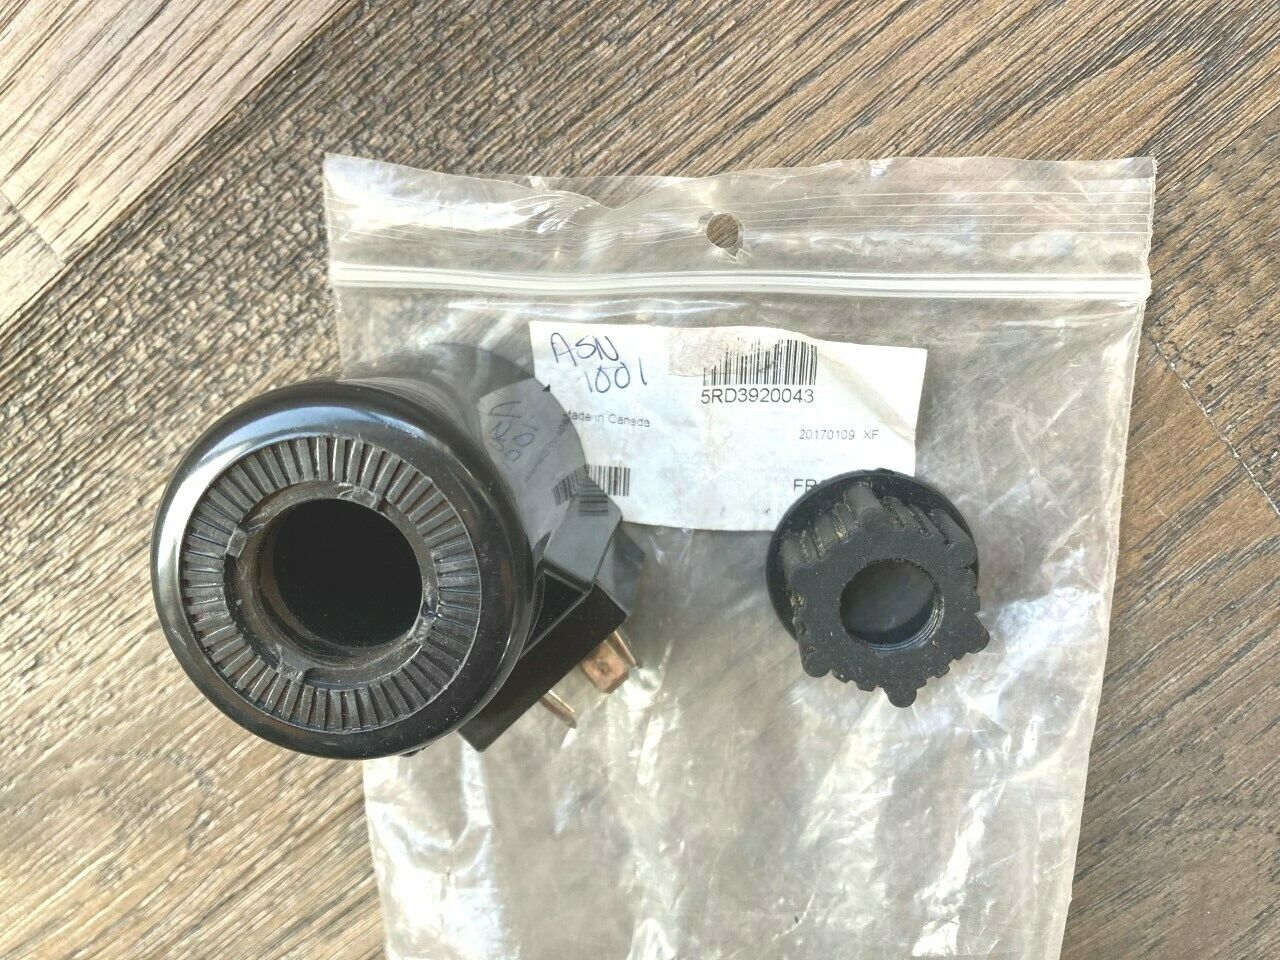 Frontier 1 New Oem 5rd3920043 Terminal & Button Kit - Obsolete